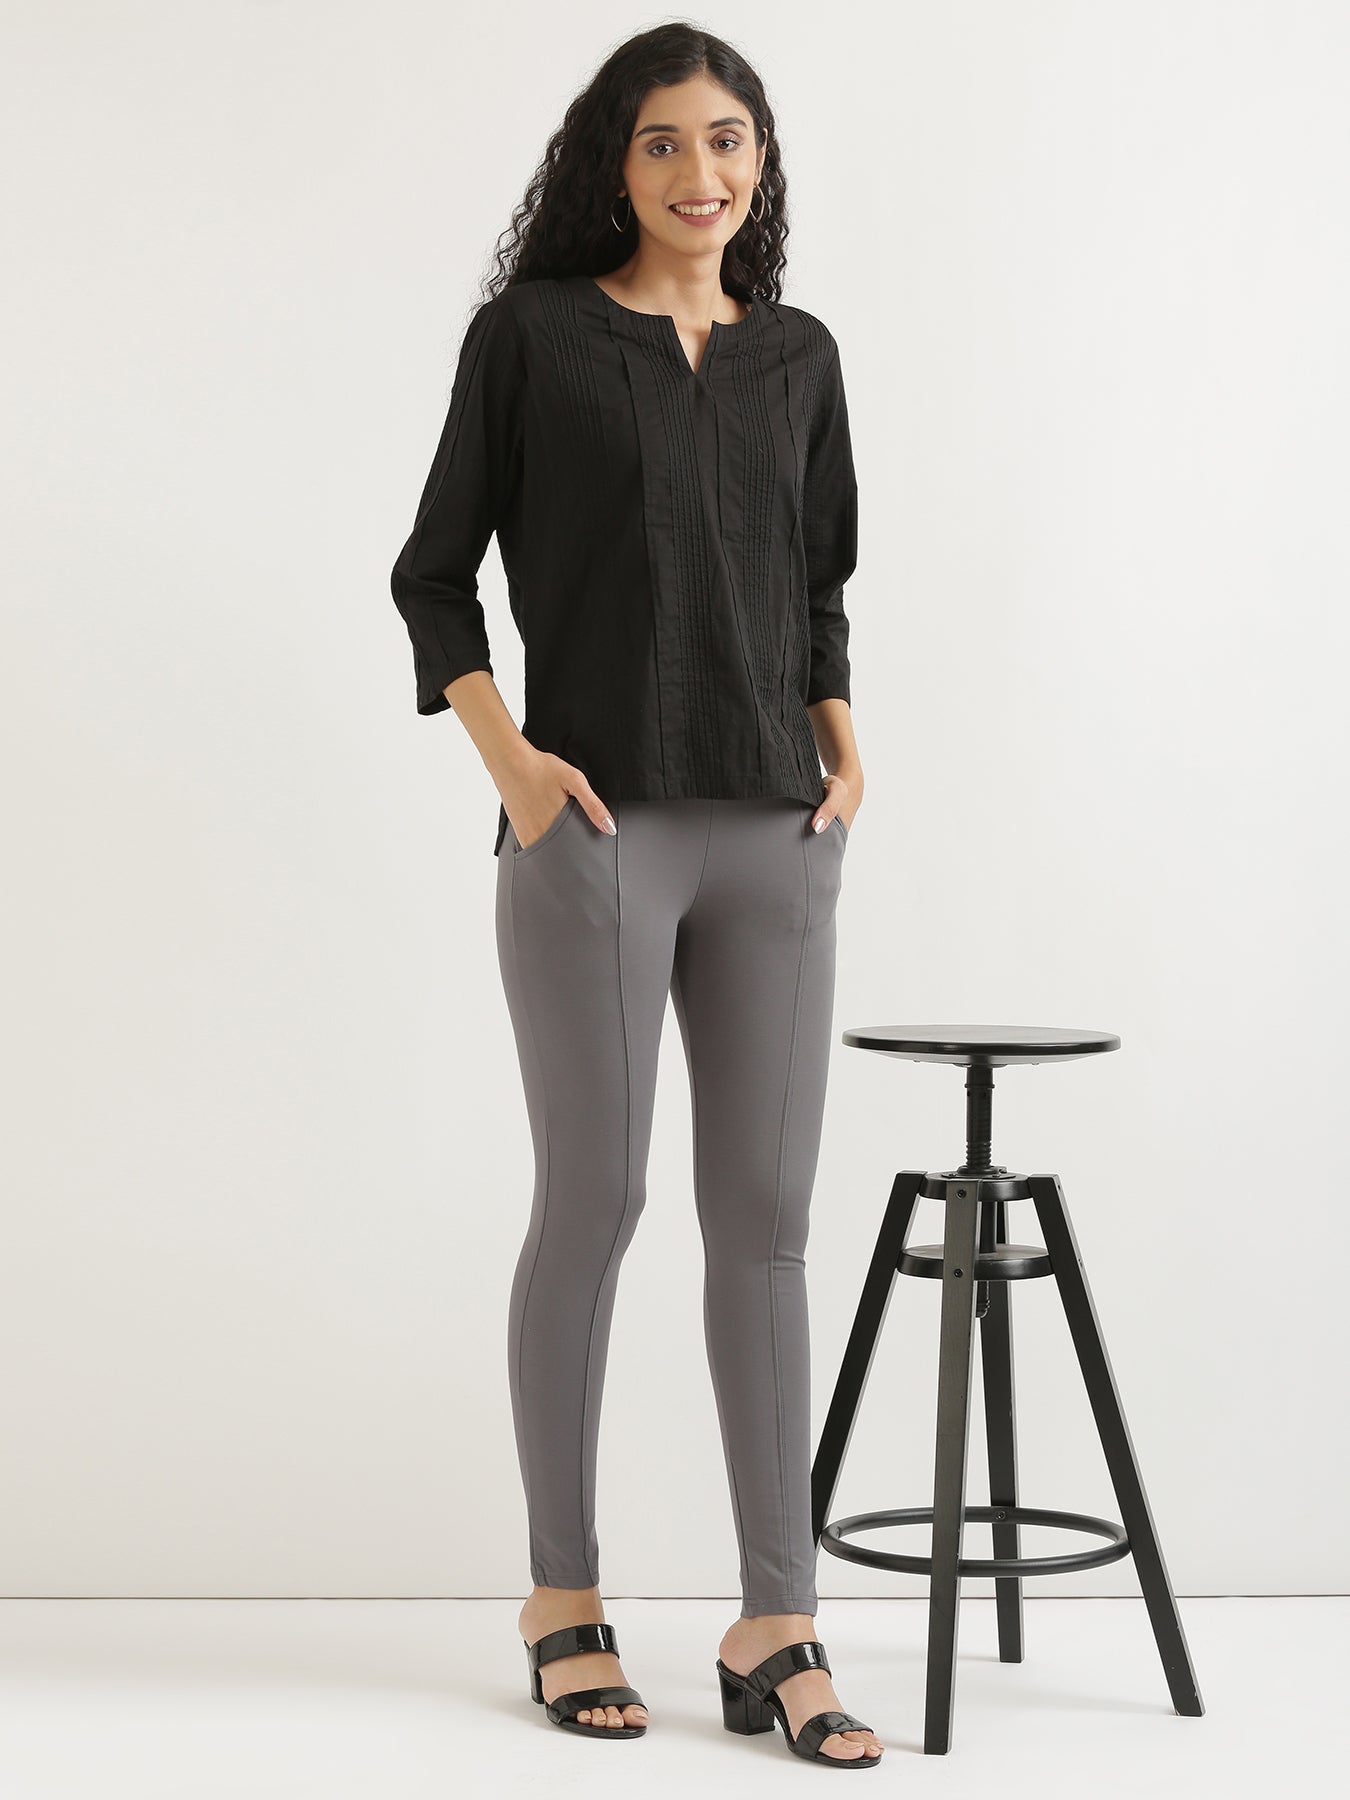 Gray Casual Wear Ladies 4 Way Lycra Yoga Pants, Size: 28 To 36 at